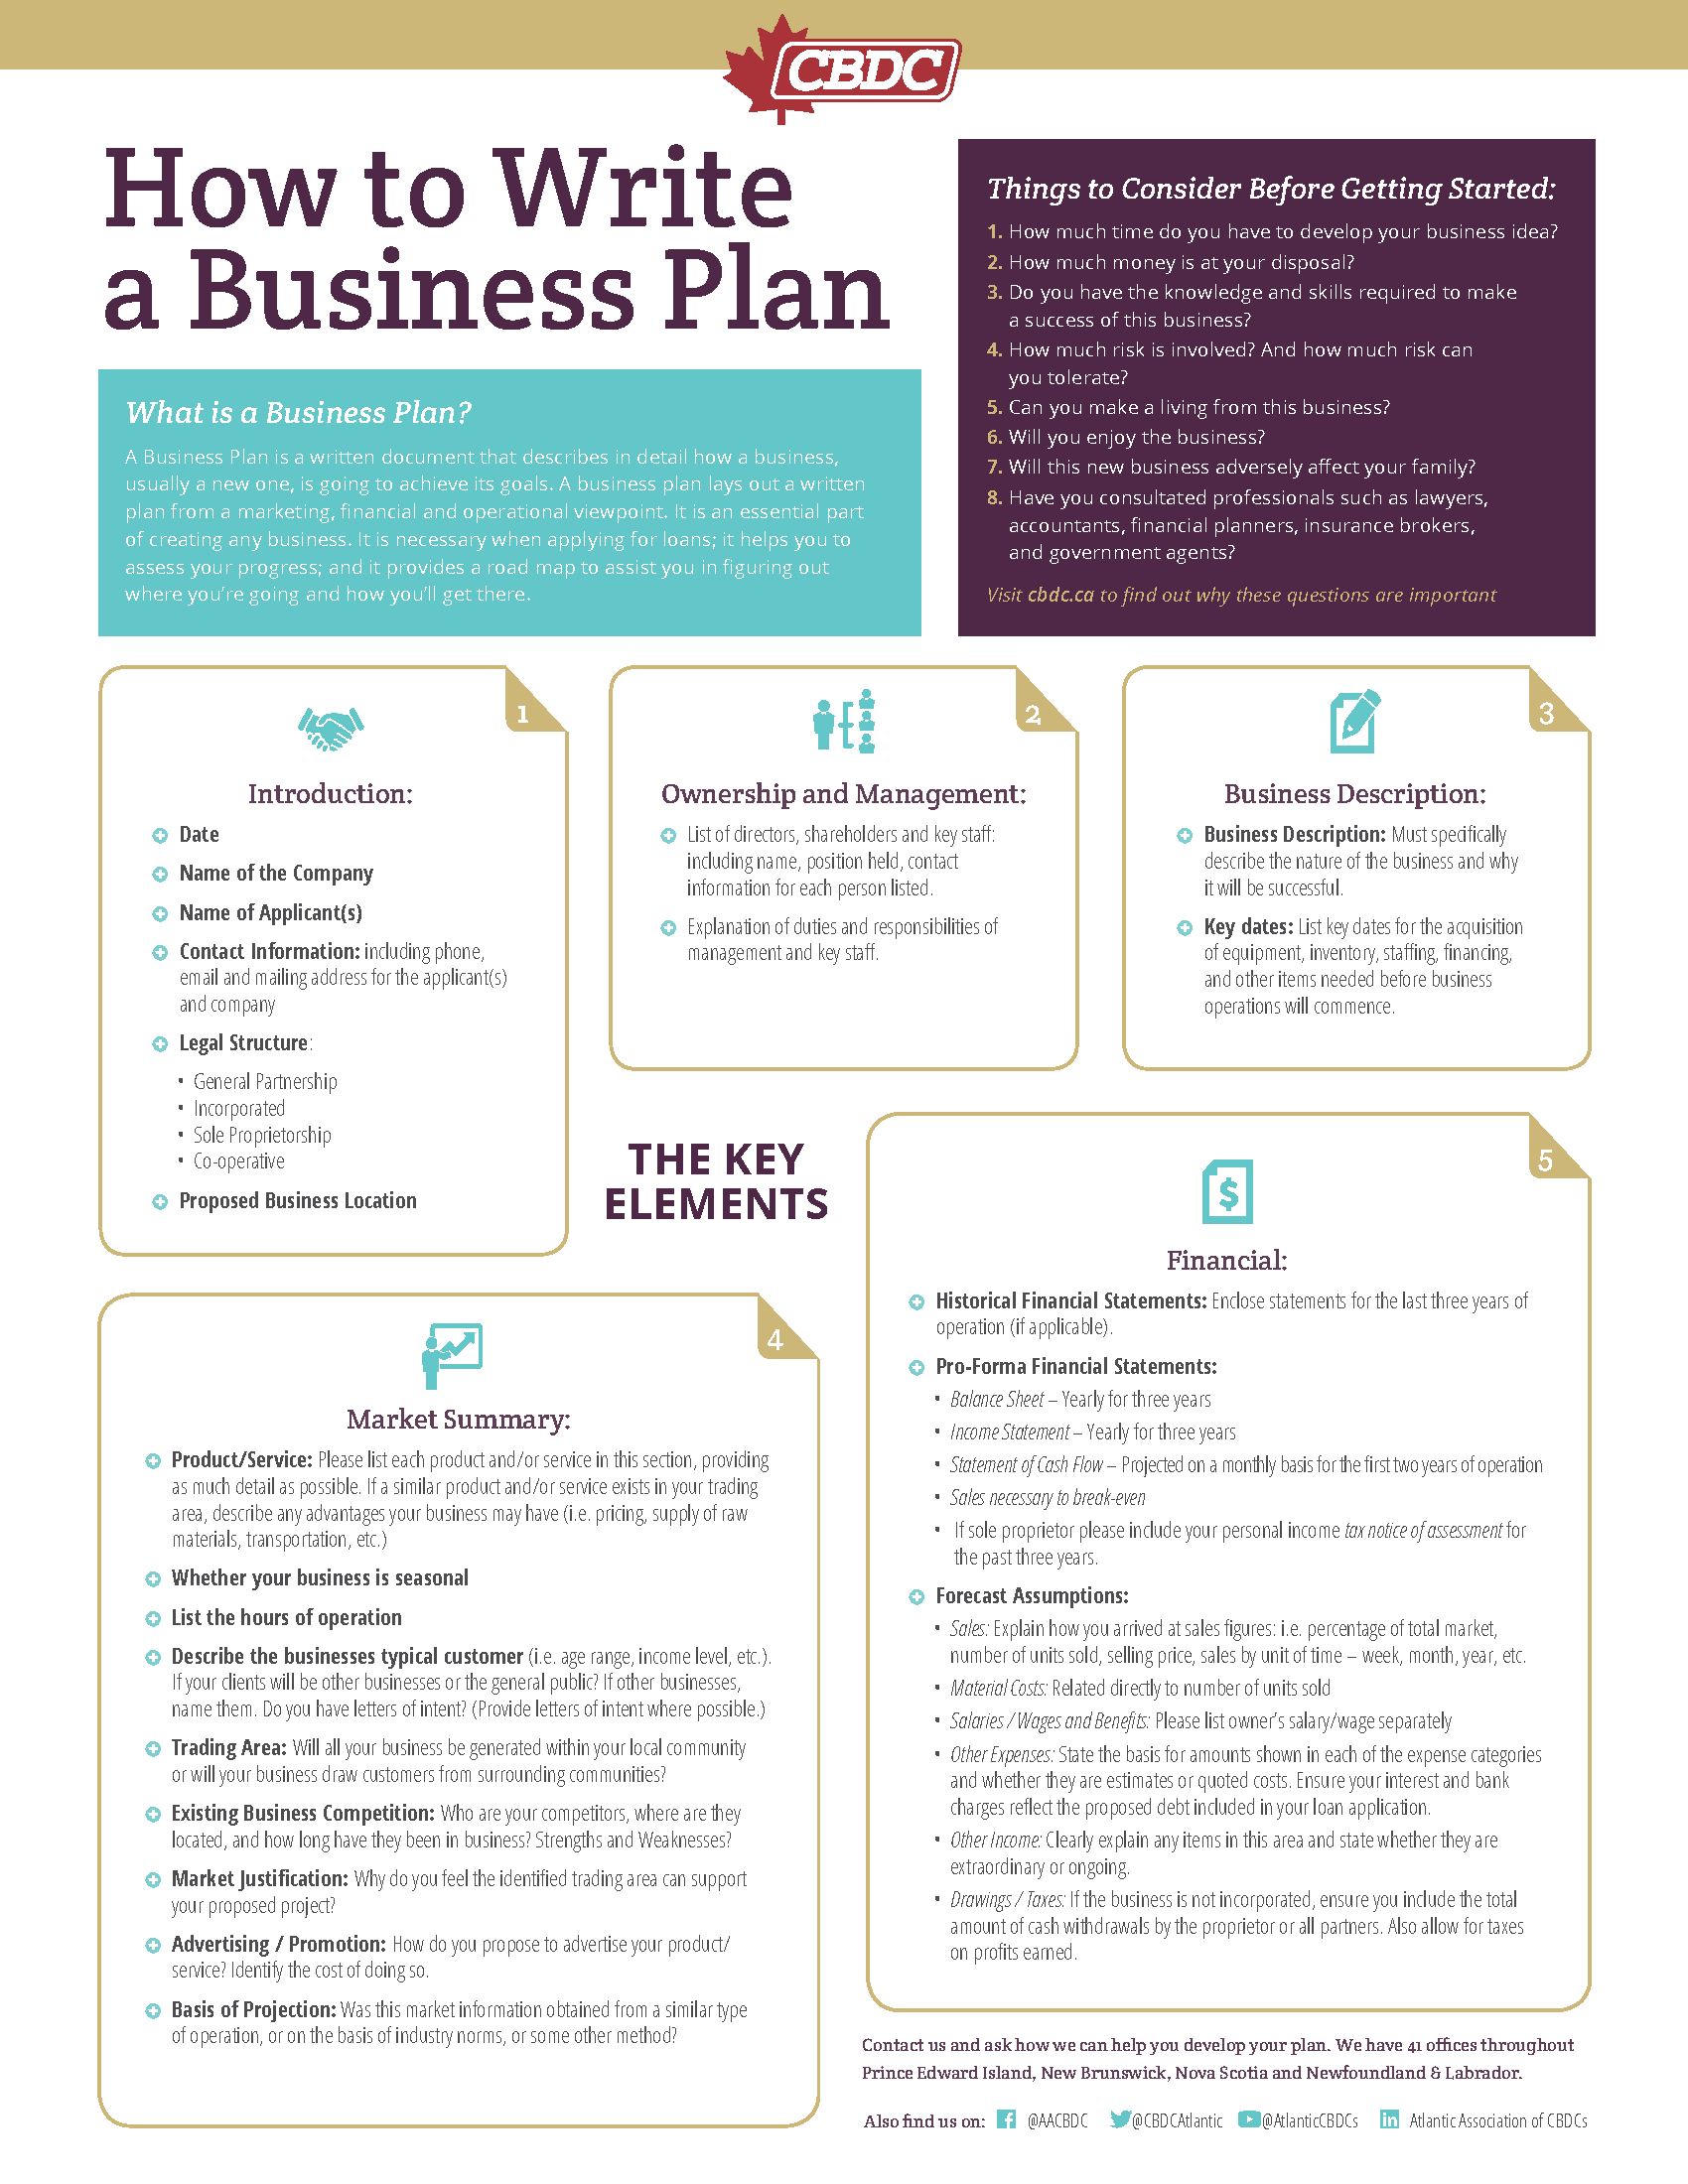 Help in writing a business plan